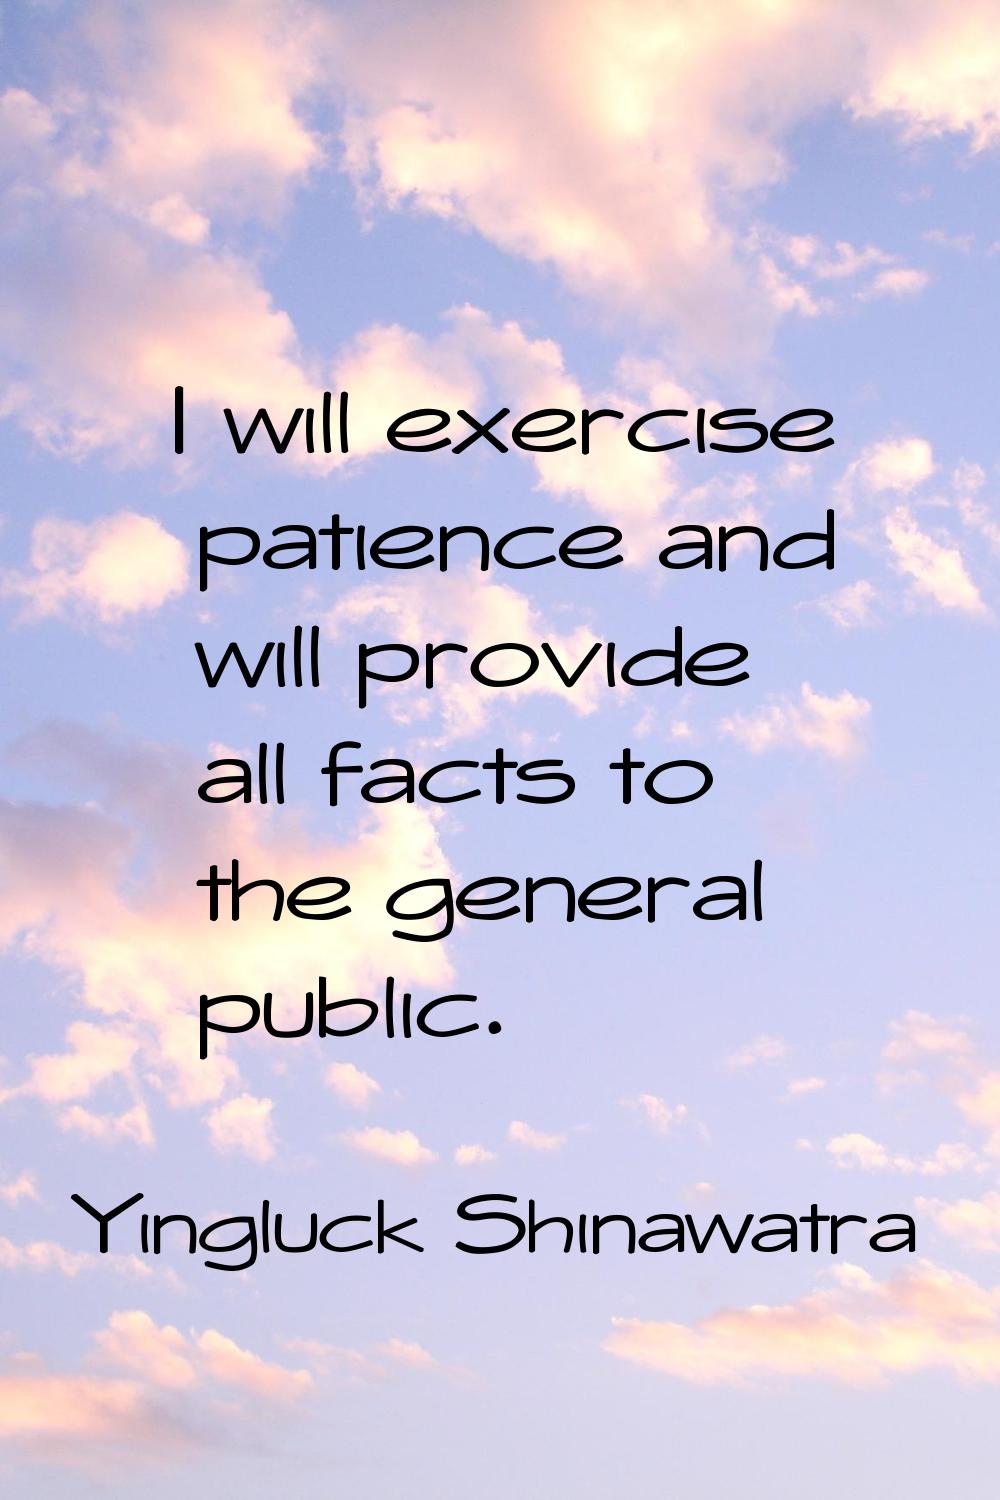 I will exercise patience and will provide all facts to the general public.